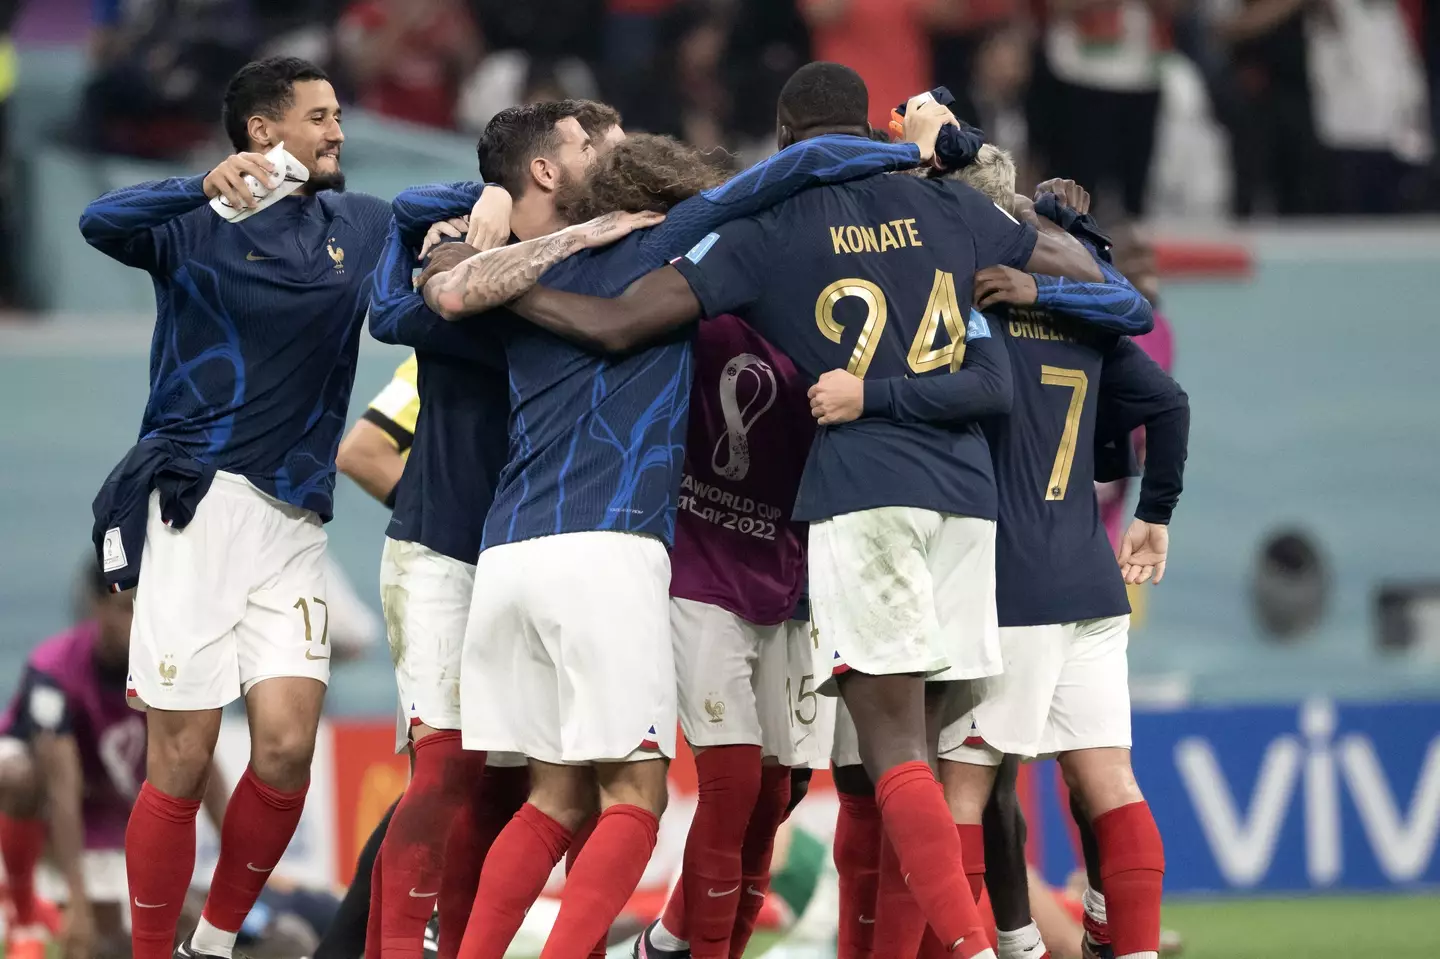 France players celebrate at the full-time whistle. (Image